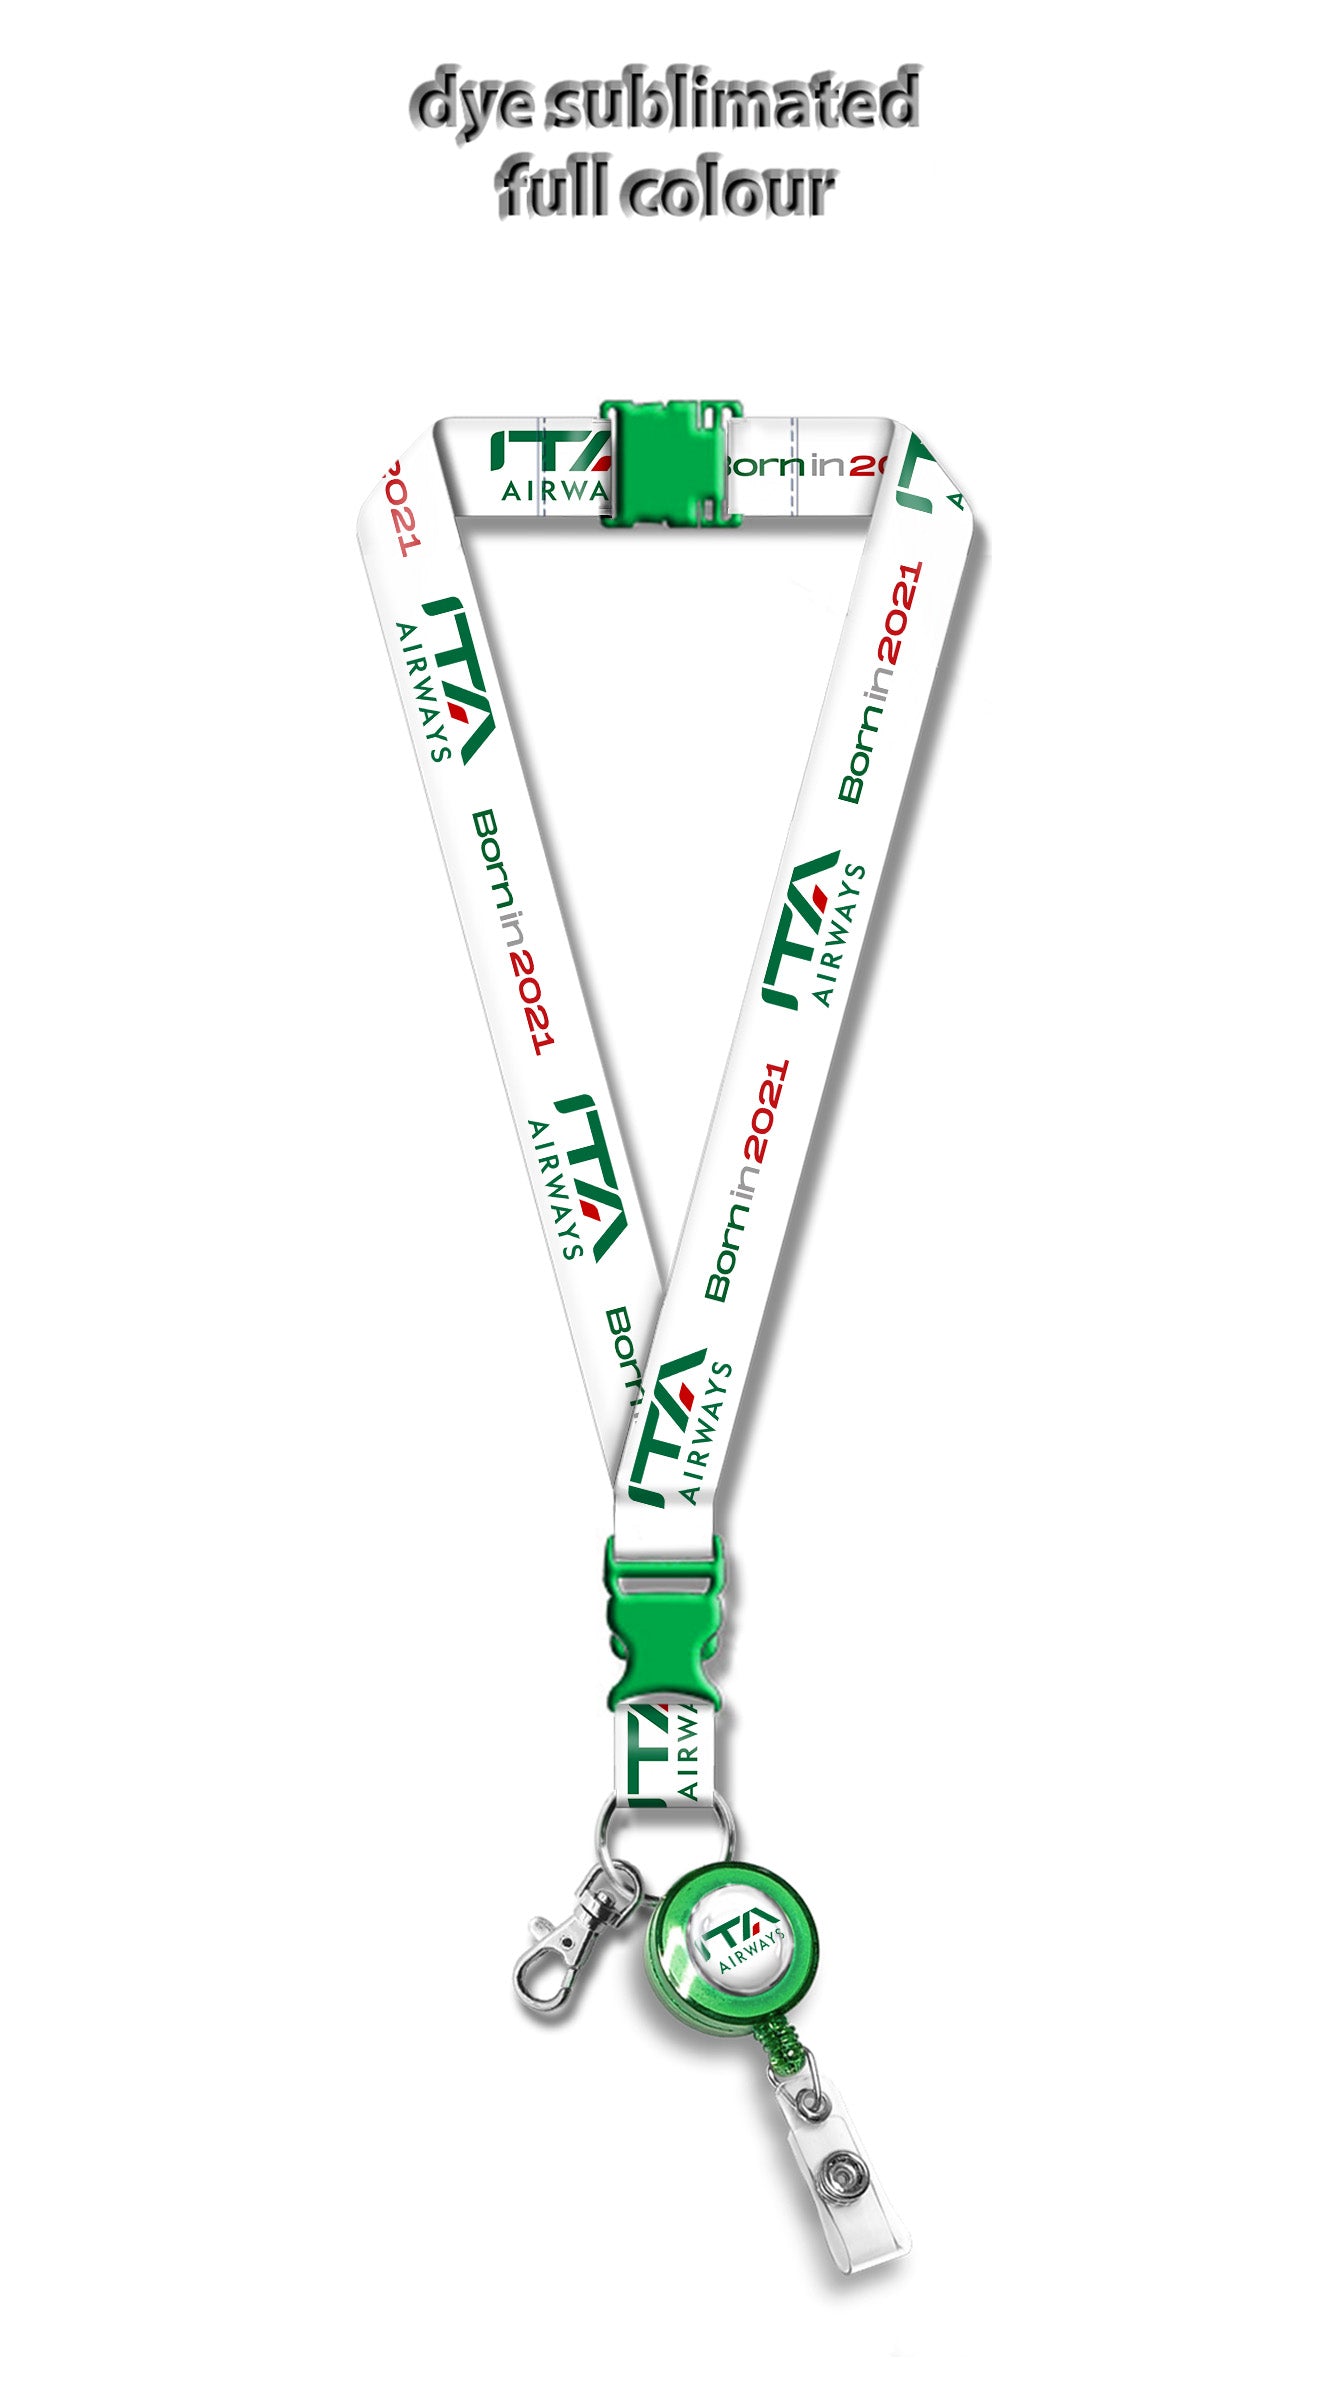 1/2 Dye-Sublimated Lanyards - Full Color and Full of Spirit!